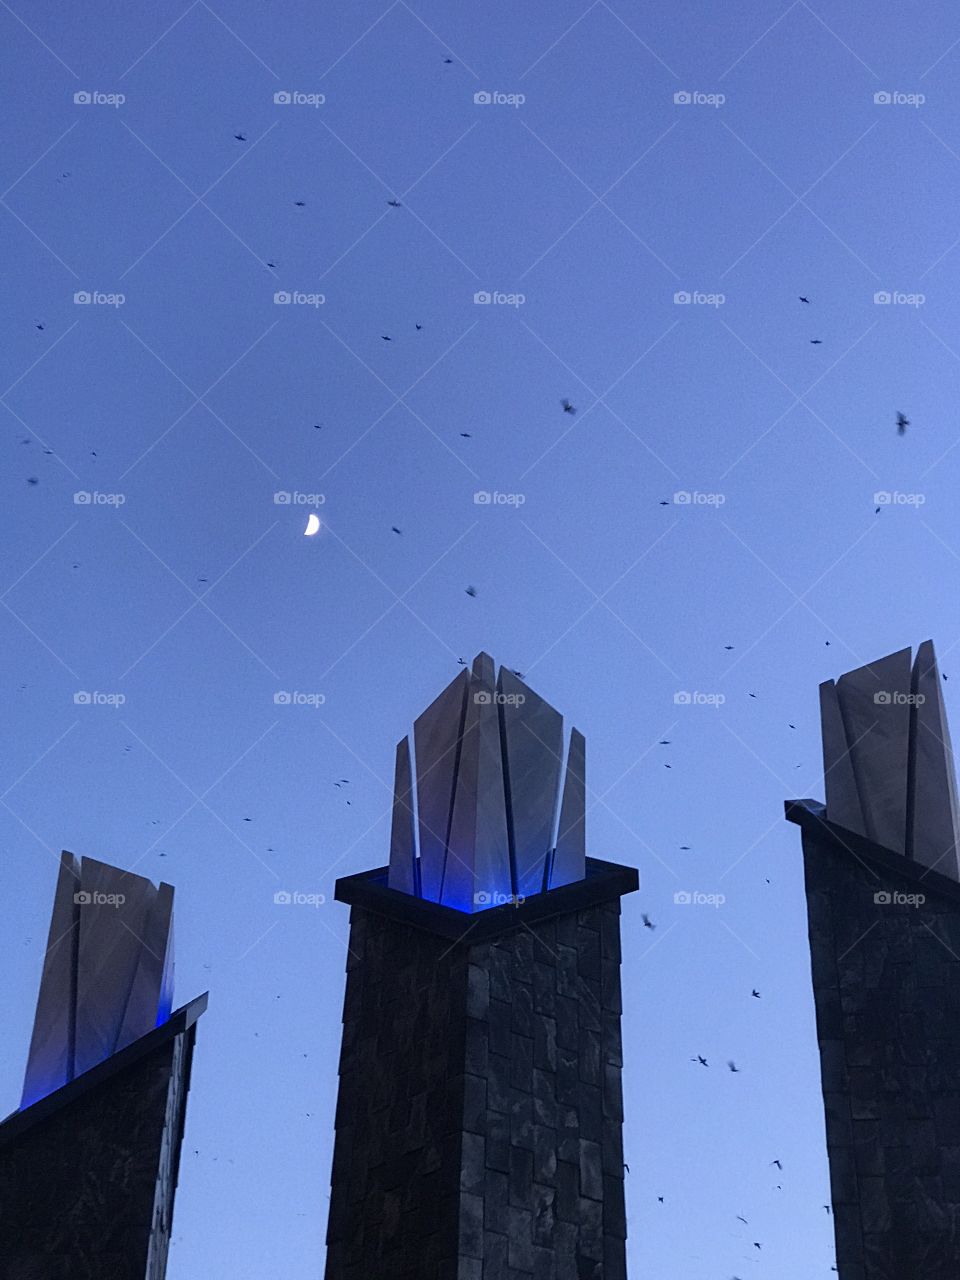 Tops of architecture design in front of a building with birds flying all around and the moon showing at sunset! This is an unedited image!